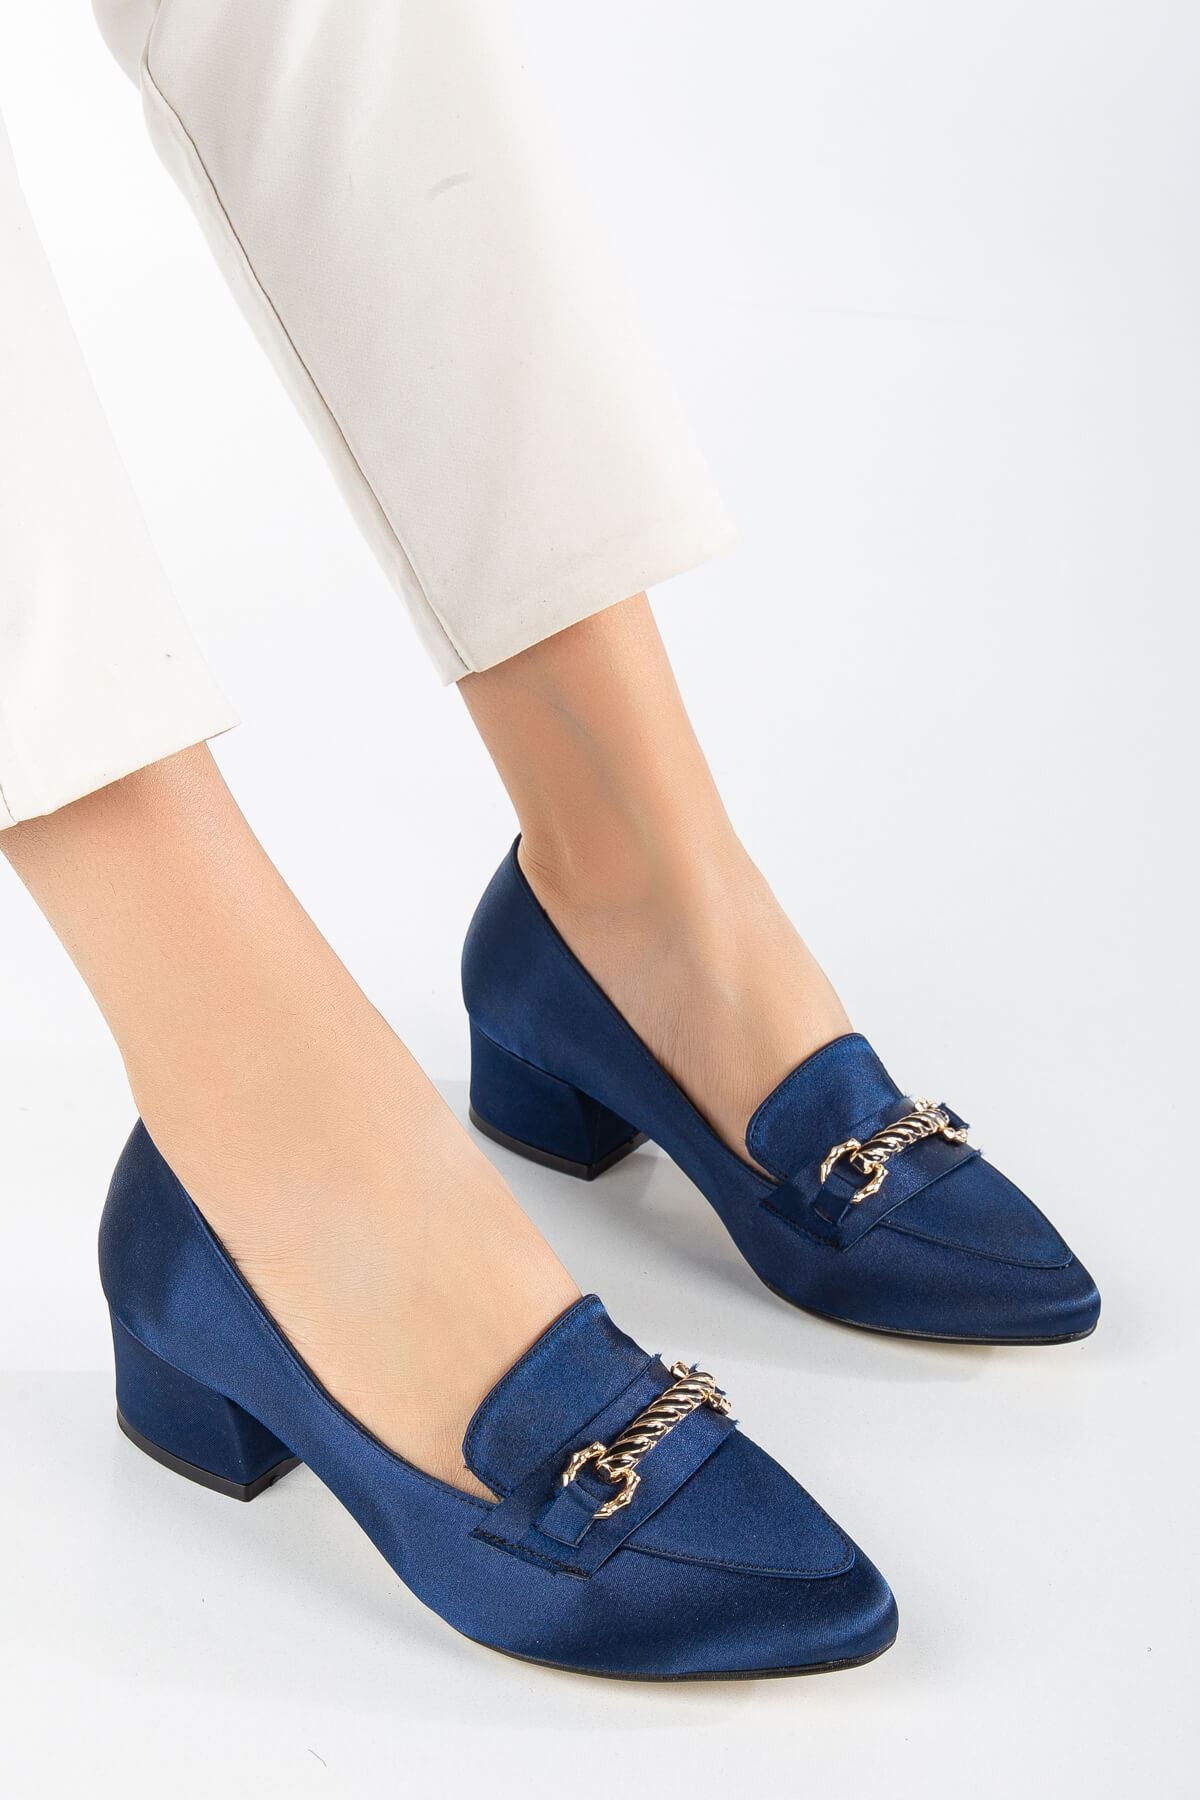 Women's Low Heeled Shoes Navy Blue Suede with Skin Buckle Detail - STREETMODE™